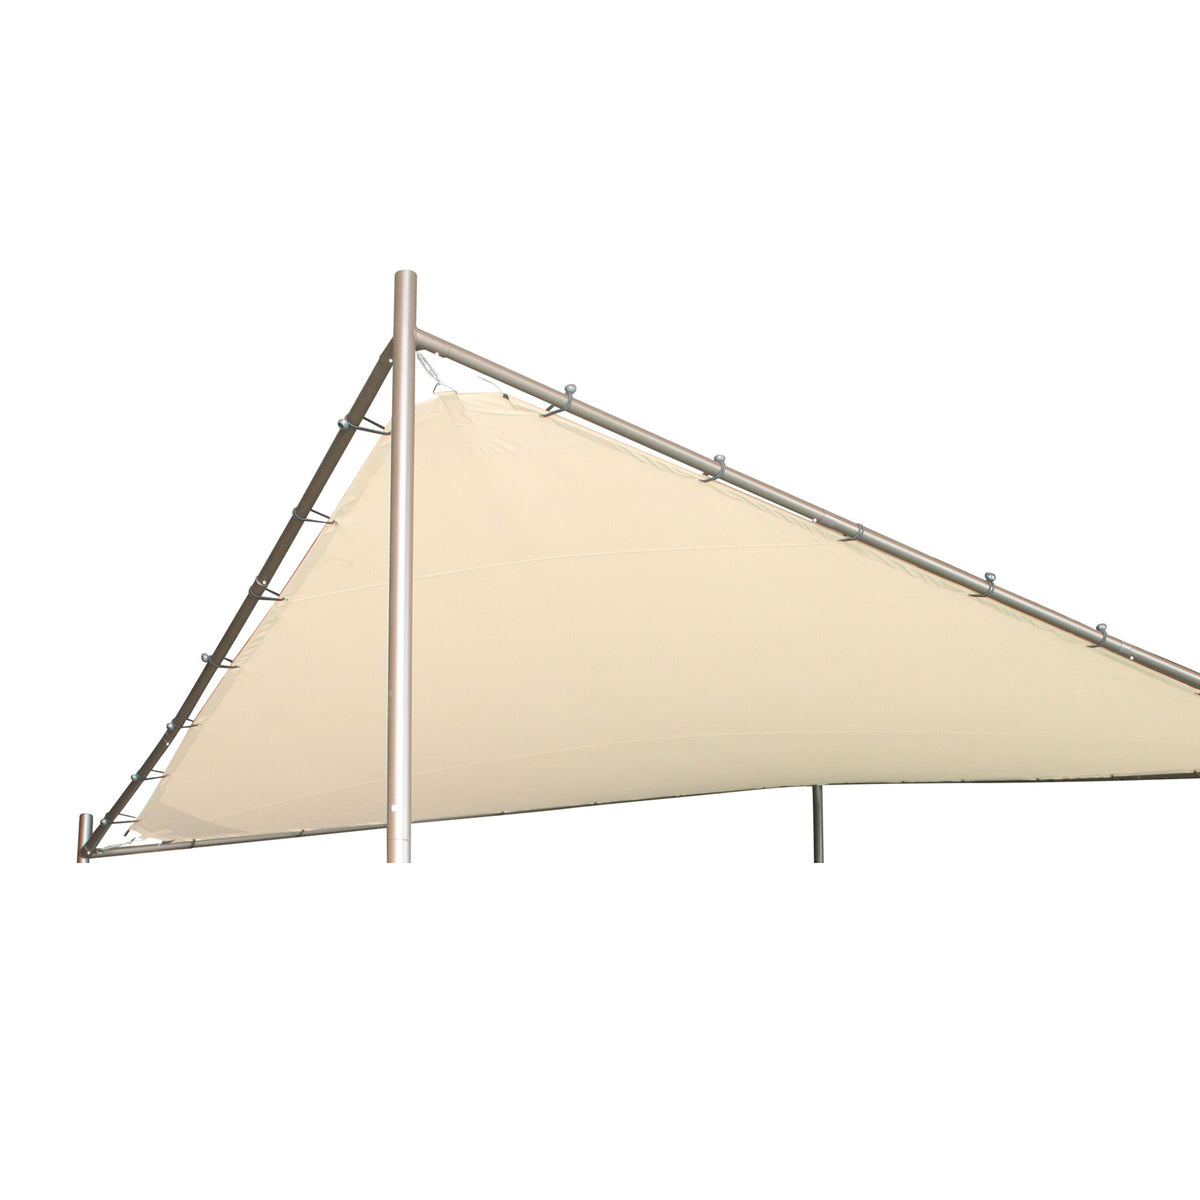 LG Outdoor Rodin 3.5m Sail Awning Replacement canopy- Beige